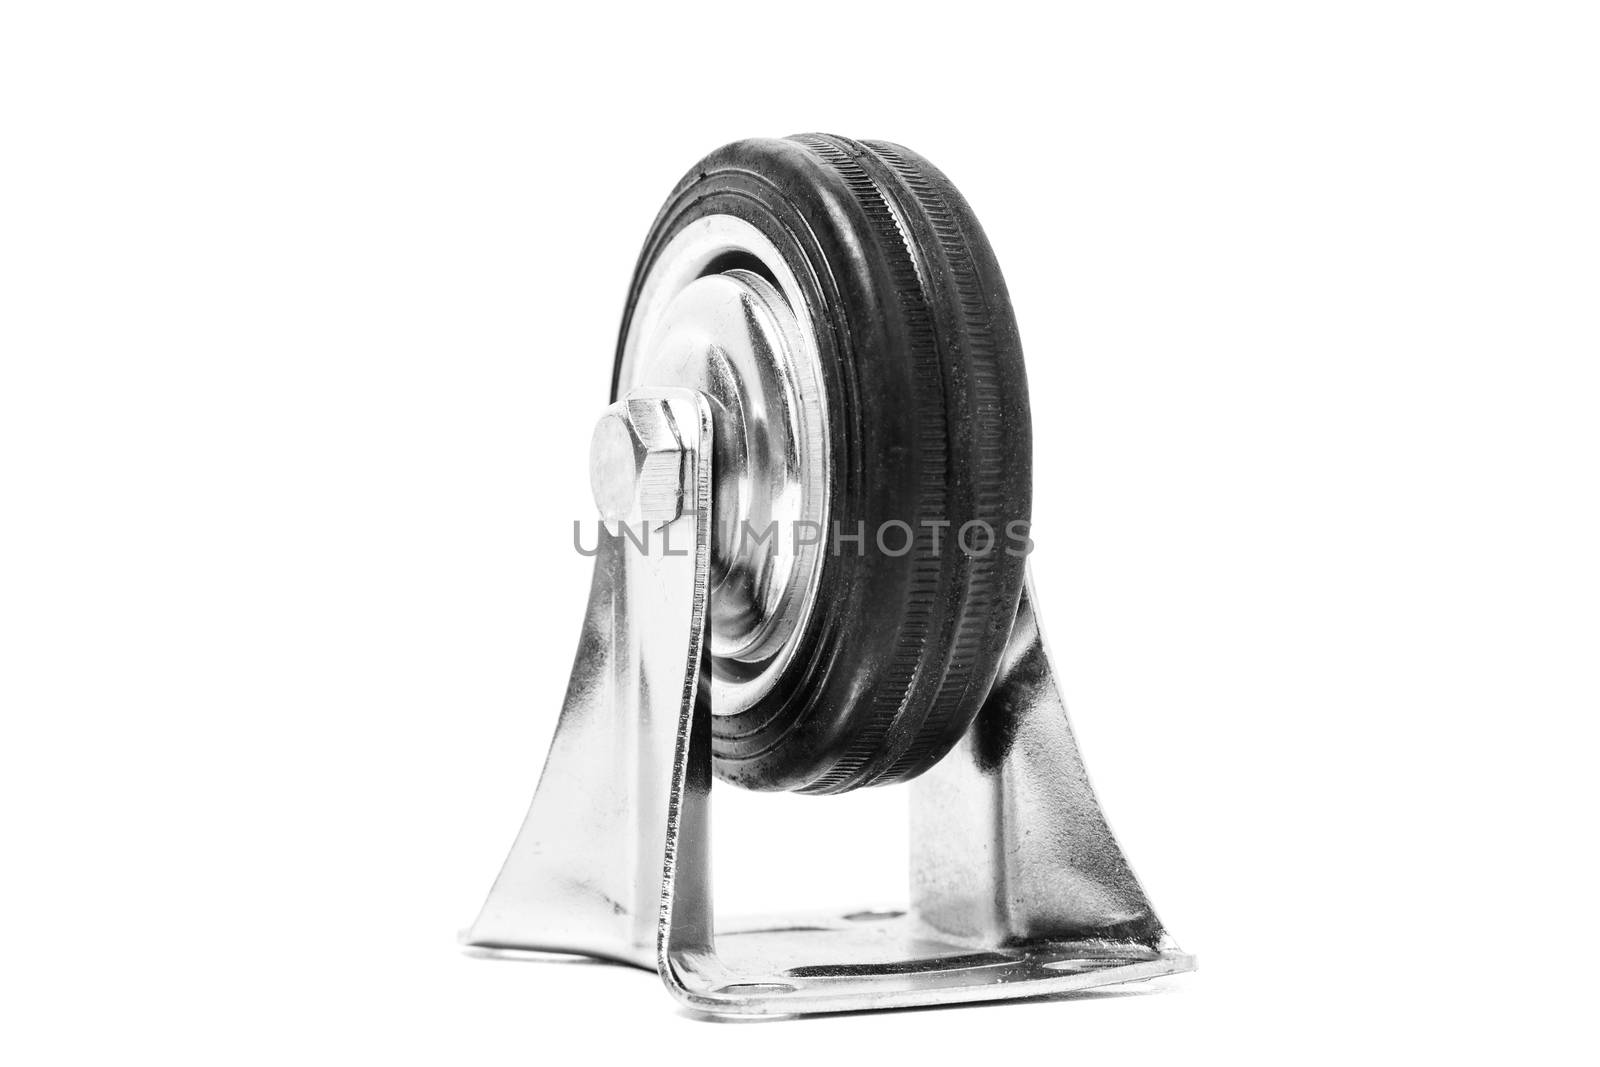 large metal industrial wheel with rubber tire, isolated on white background